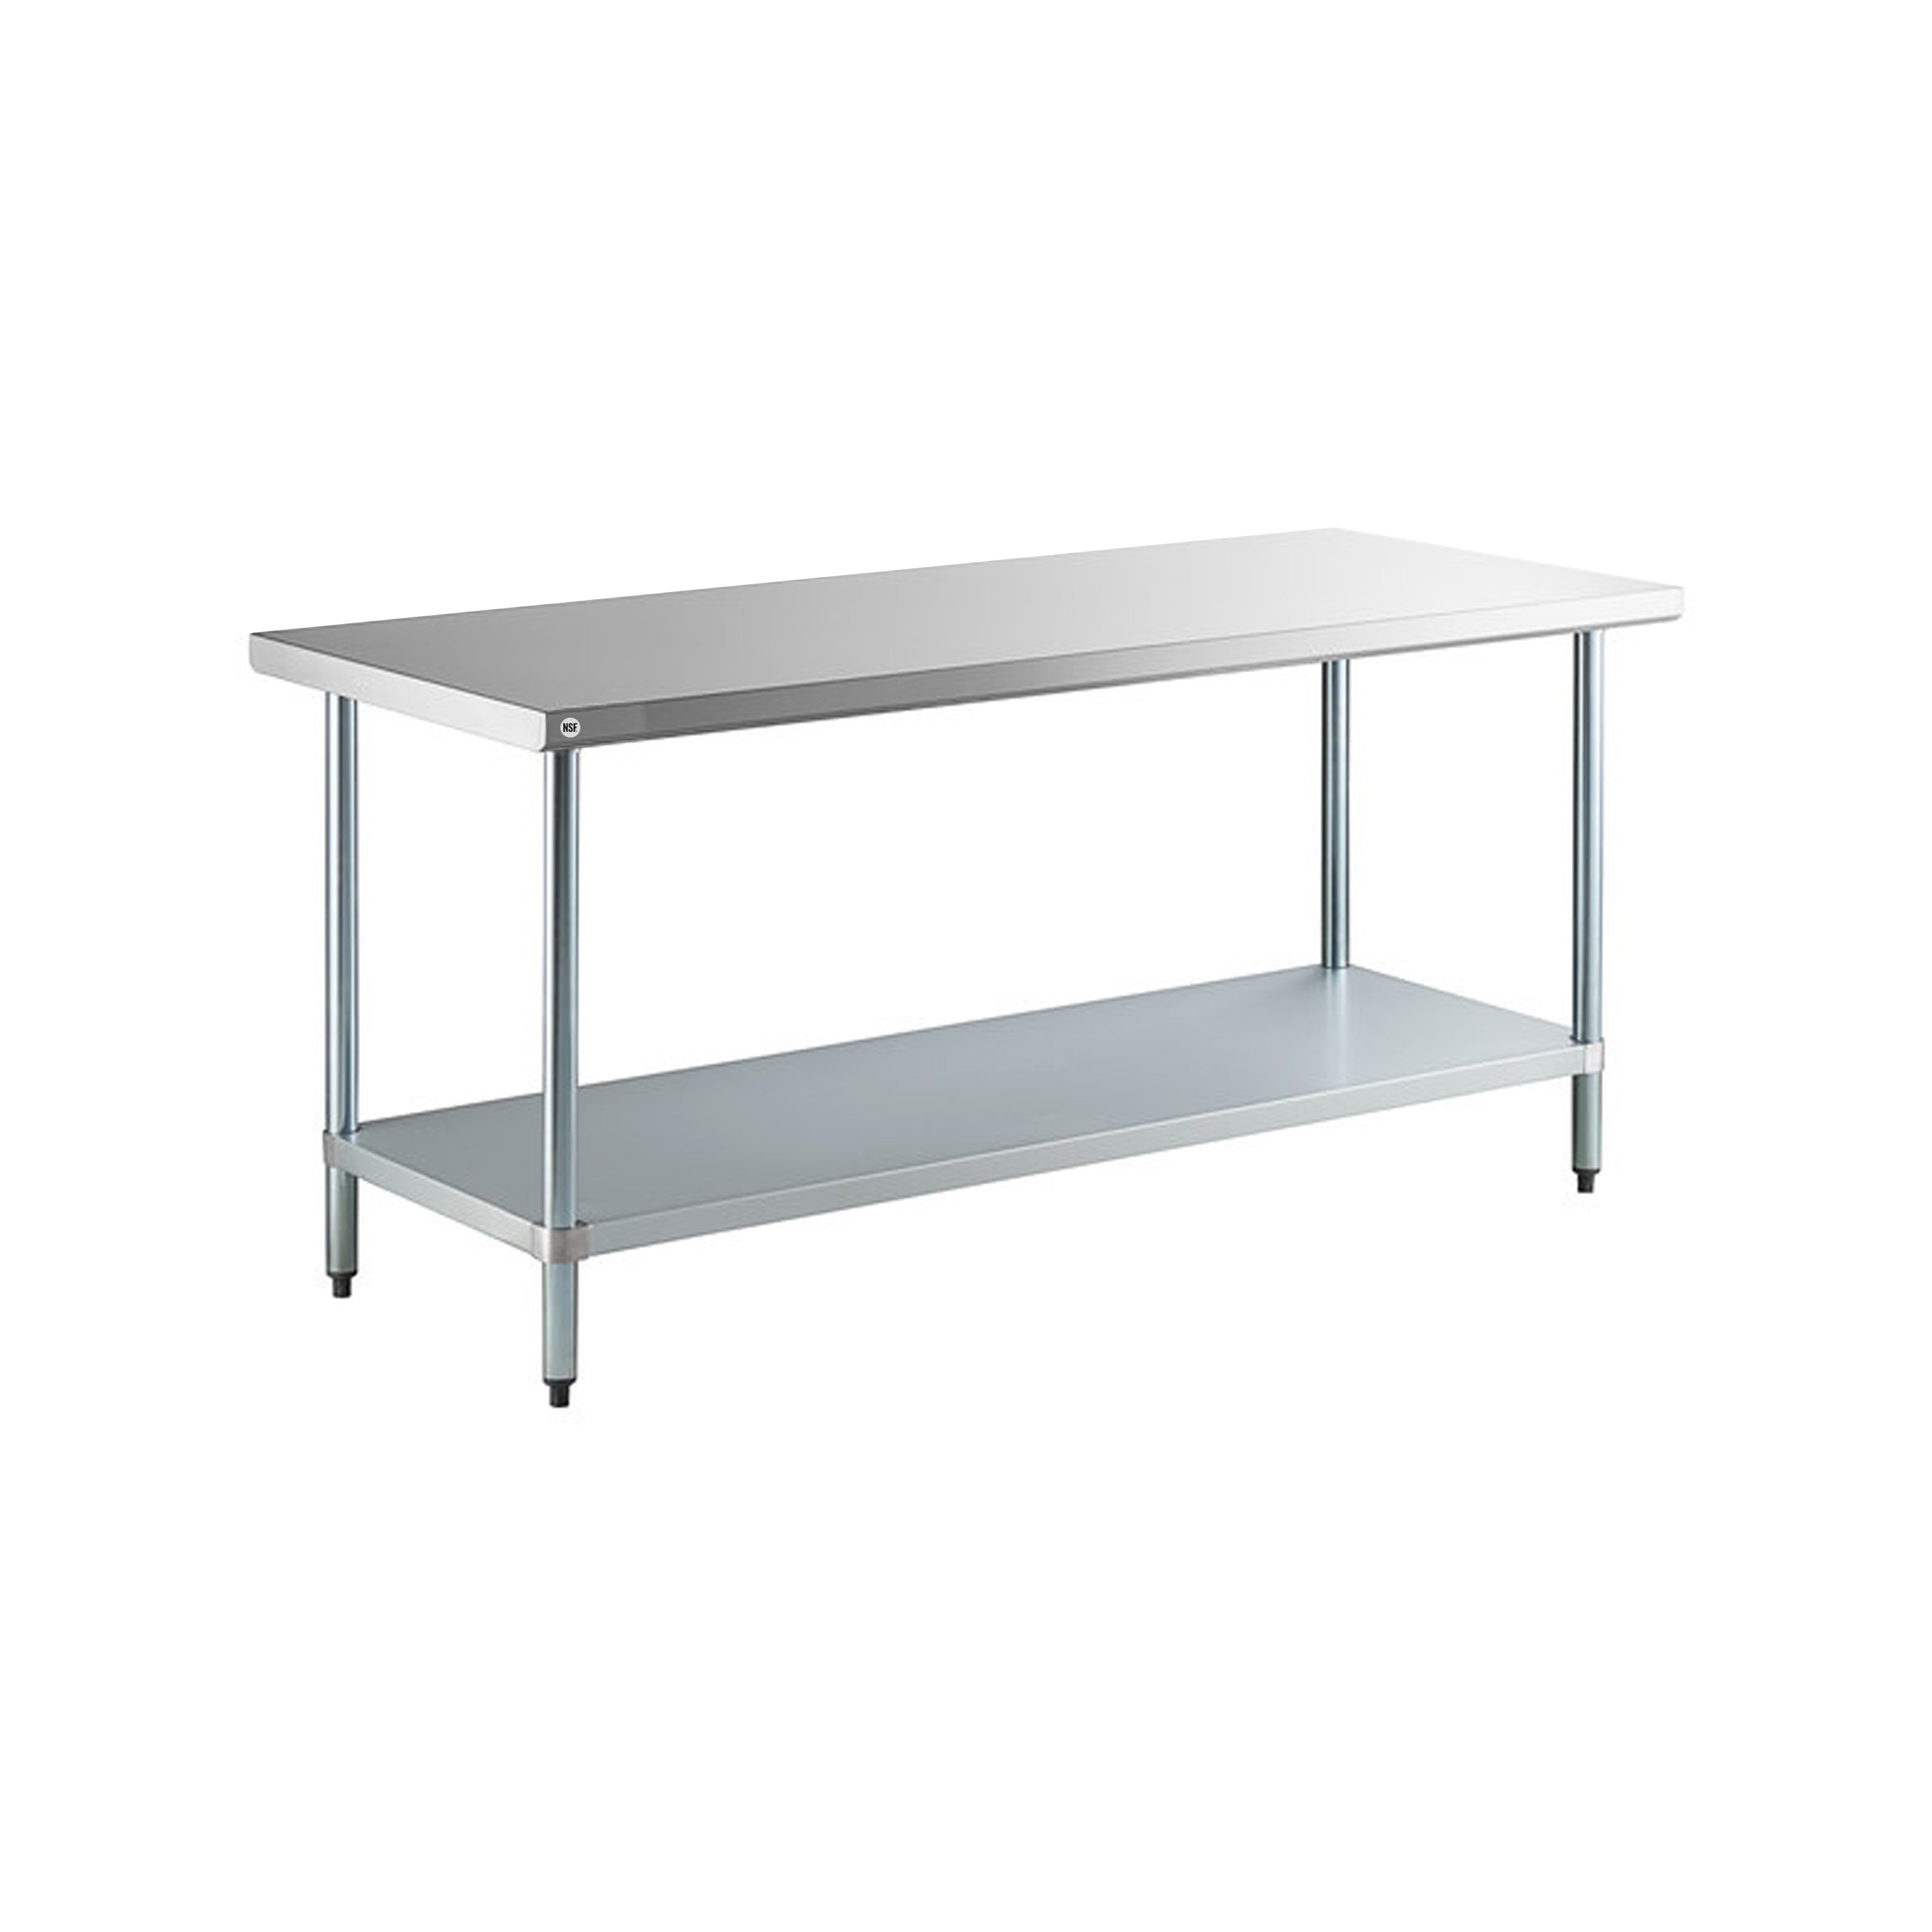 Omcan - 22066, Commercial 24" x 48" Stainless Steel Kitchen Work Table 1000lbs Light Duty